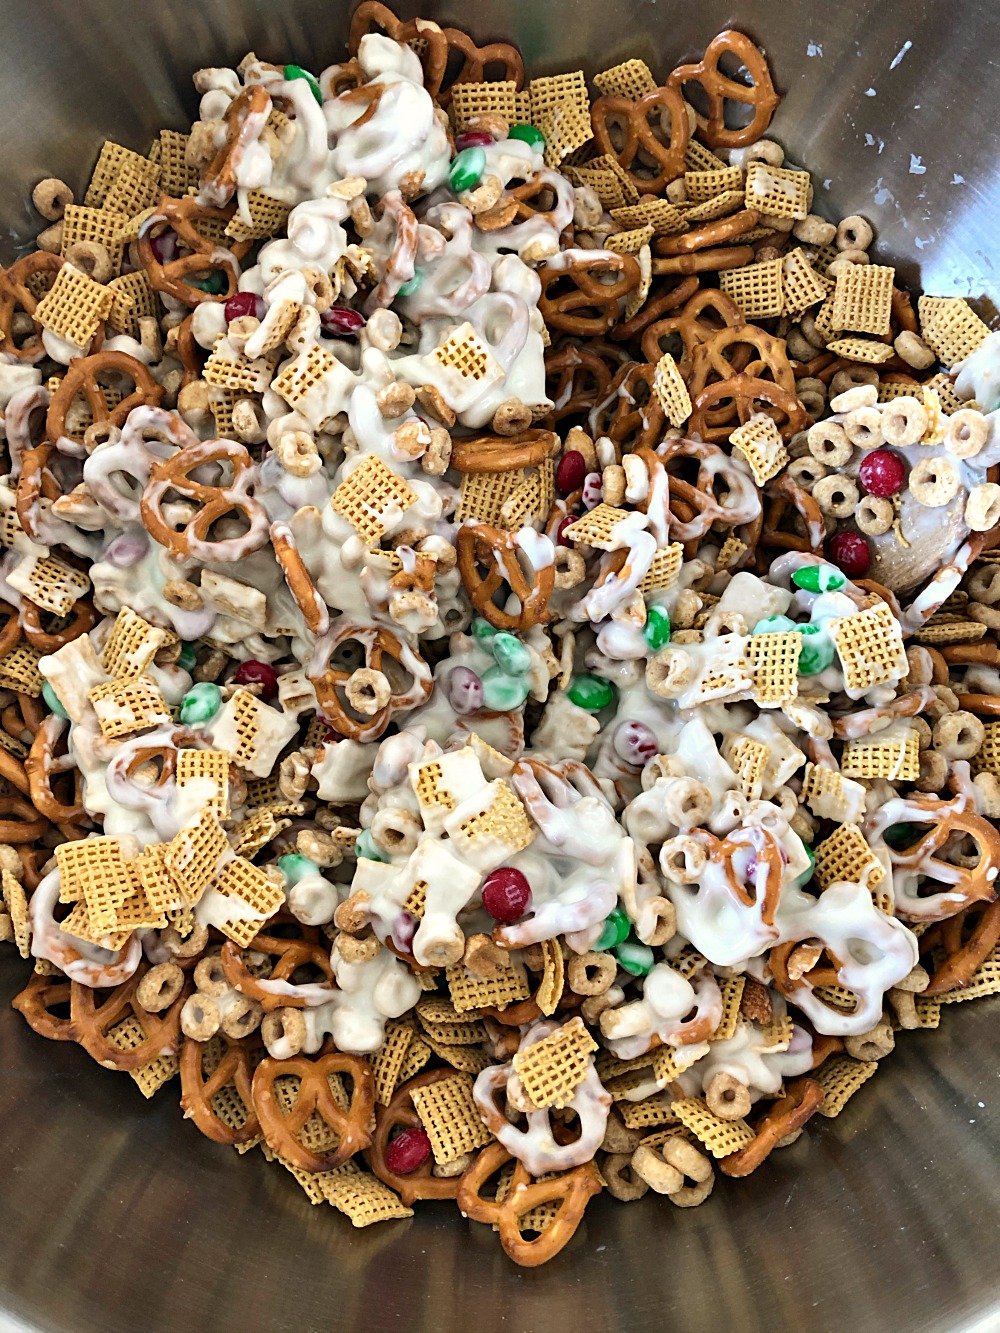 White Chocolate Chex Party Mix ingredients in a large metal bowl